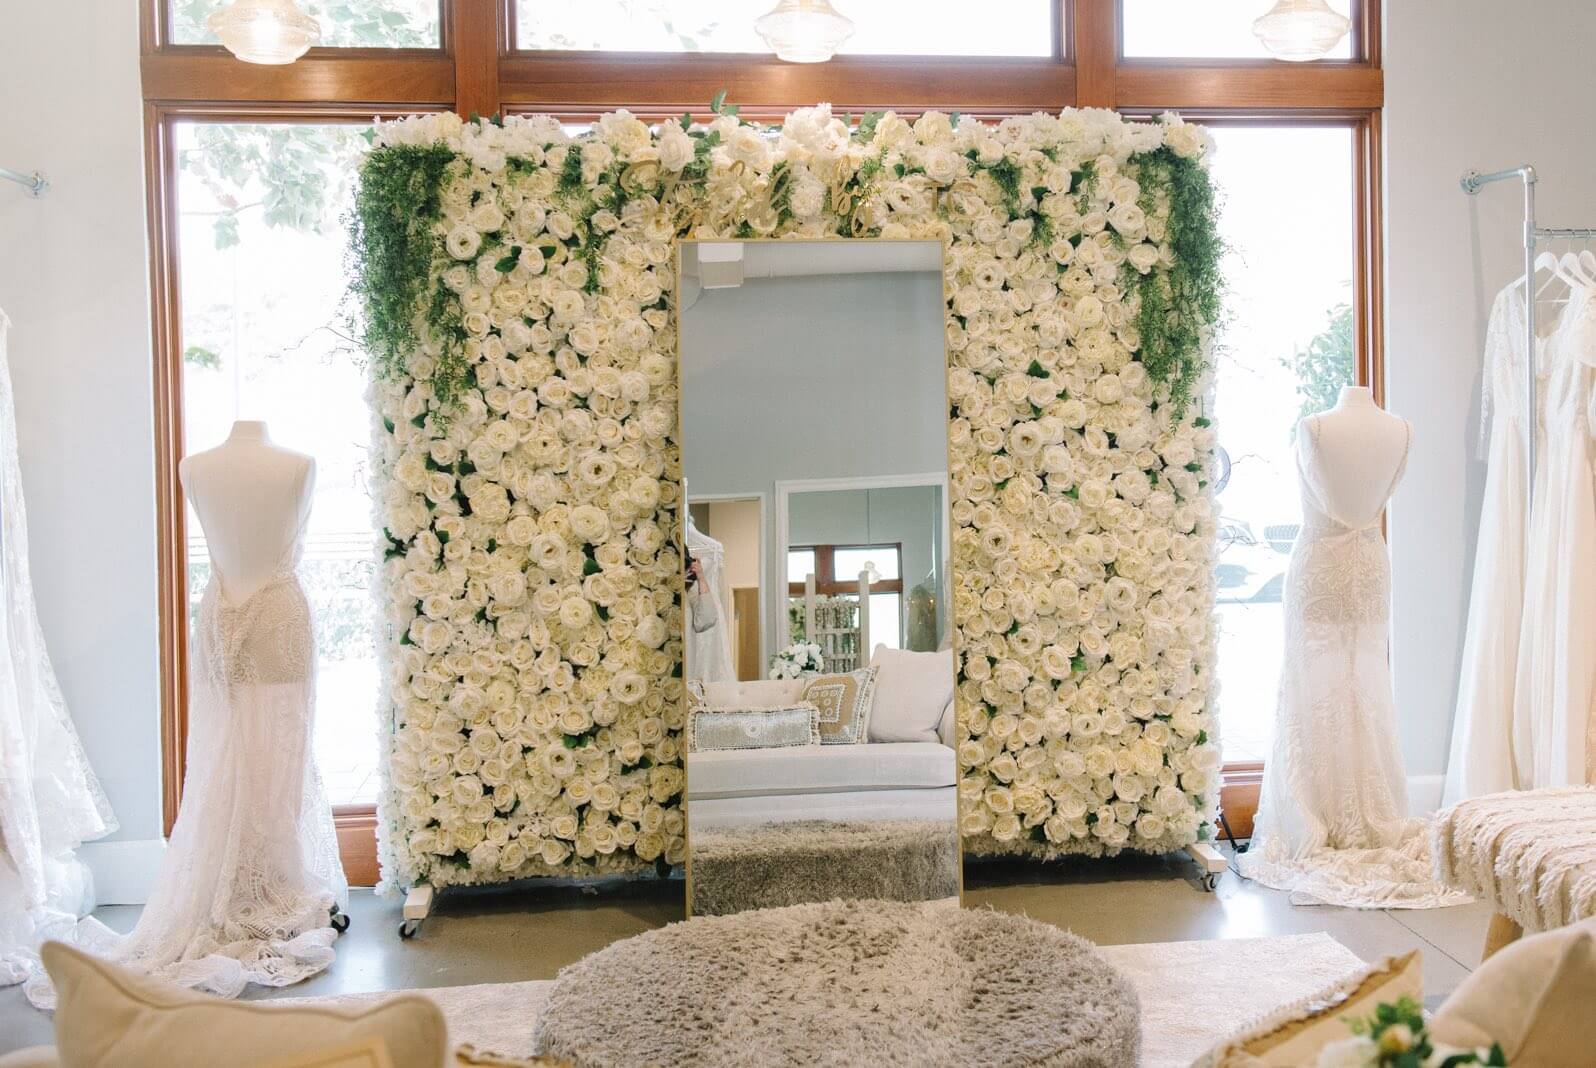 Photo of Styled by TC Bridal Boutique Showroom Interior